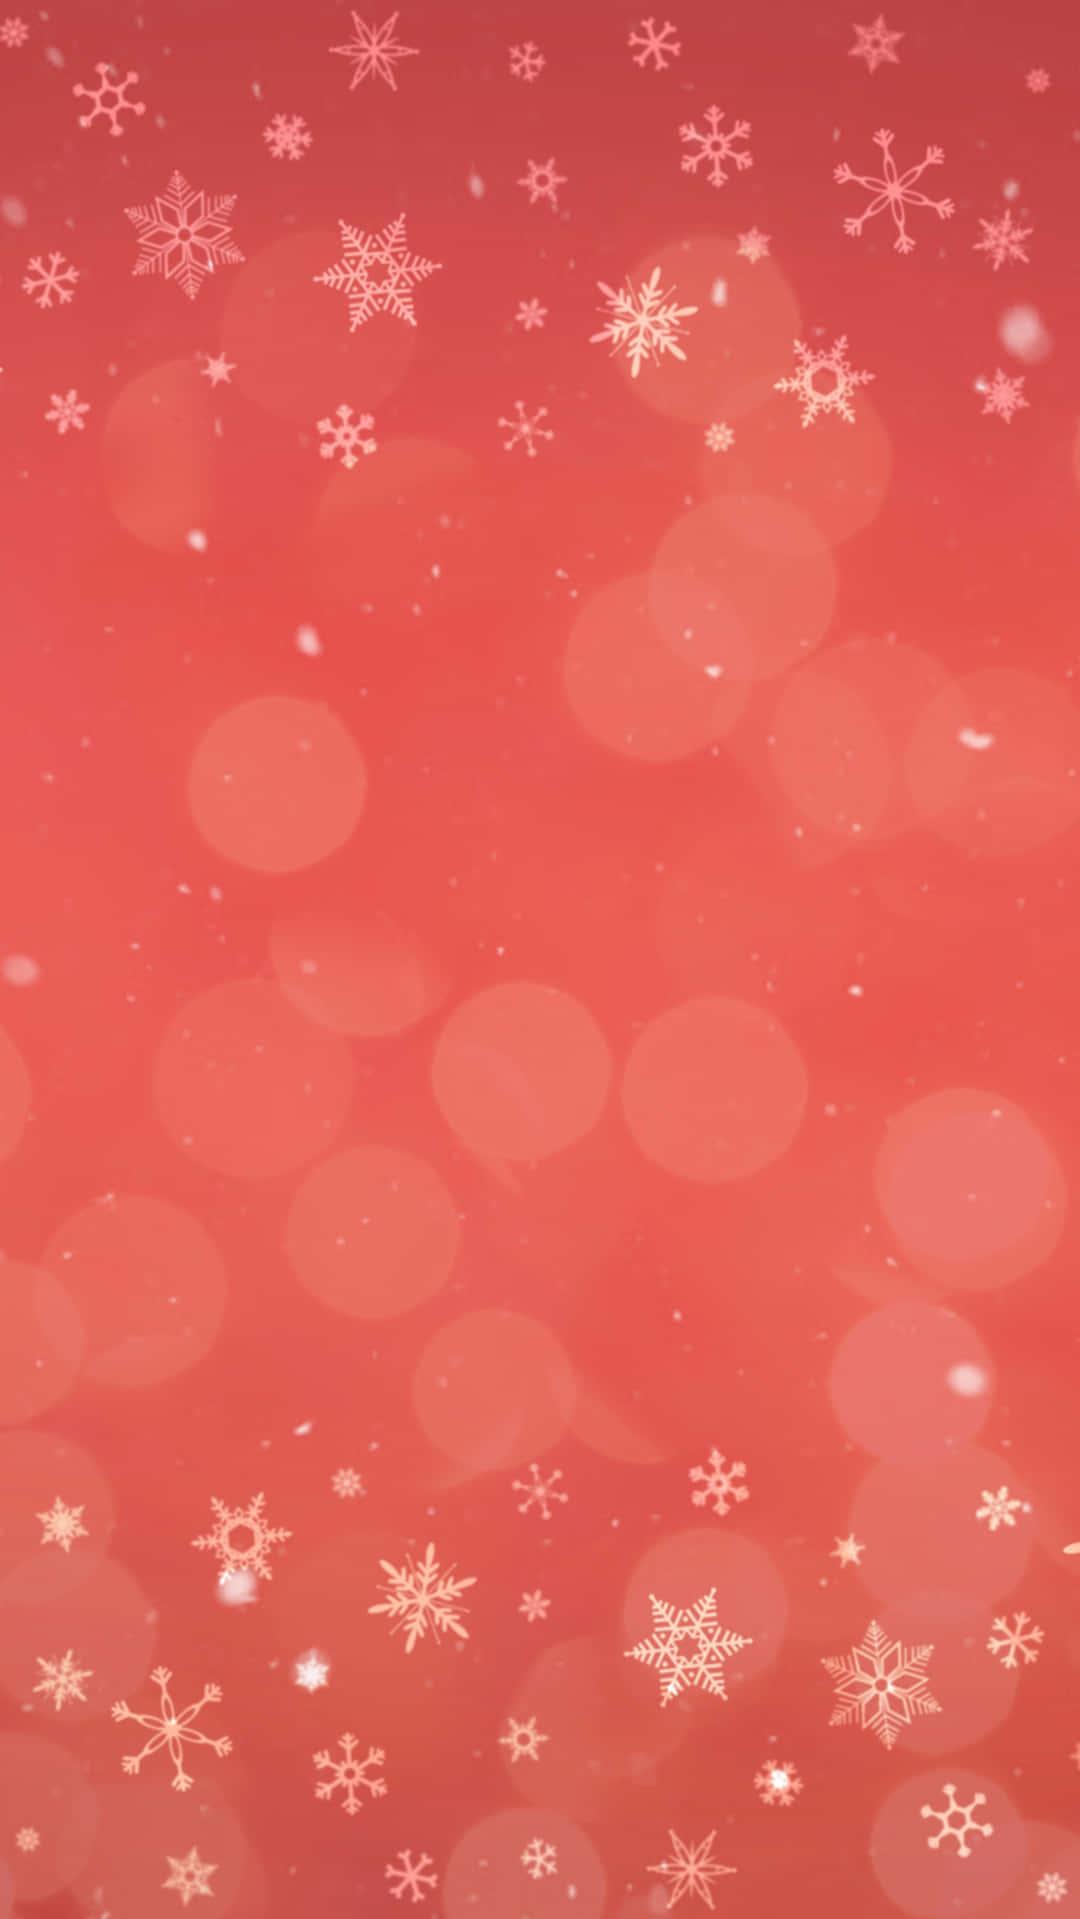 Festive Christmas Background With Sparkling Ornaments And